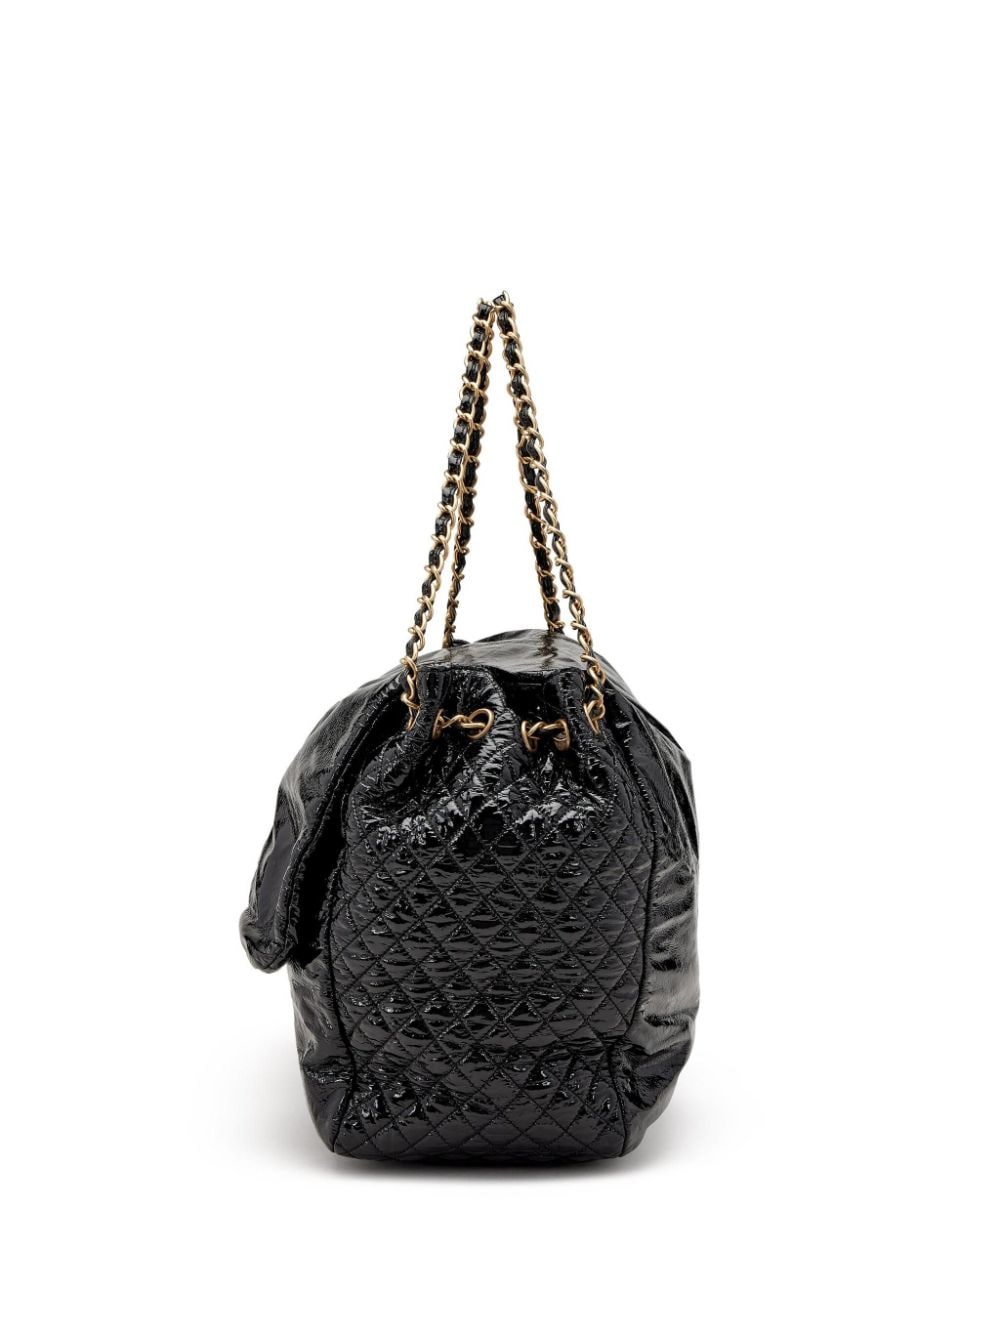 Pre-owned Chanel 2006 Jumbo Cc-stitch Flap Chain Shoulder Bag In Black